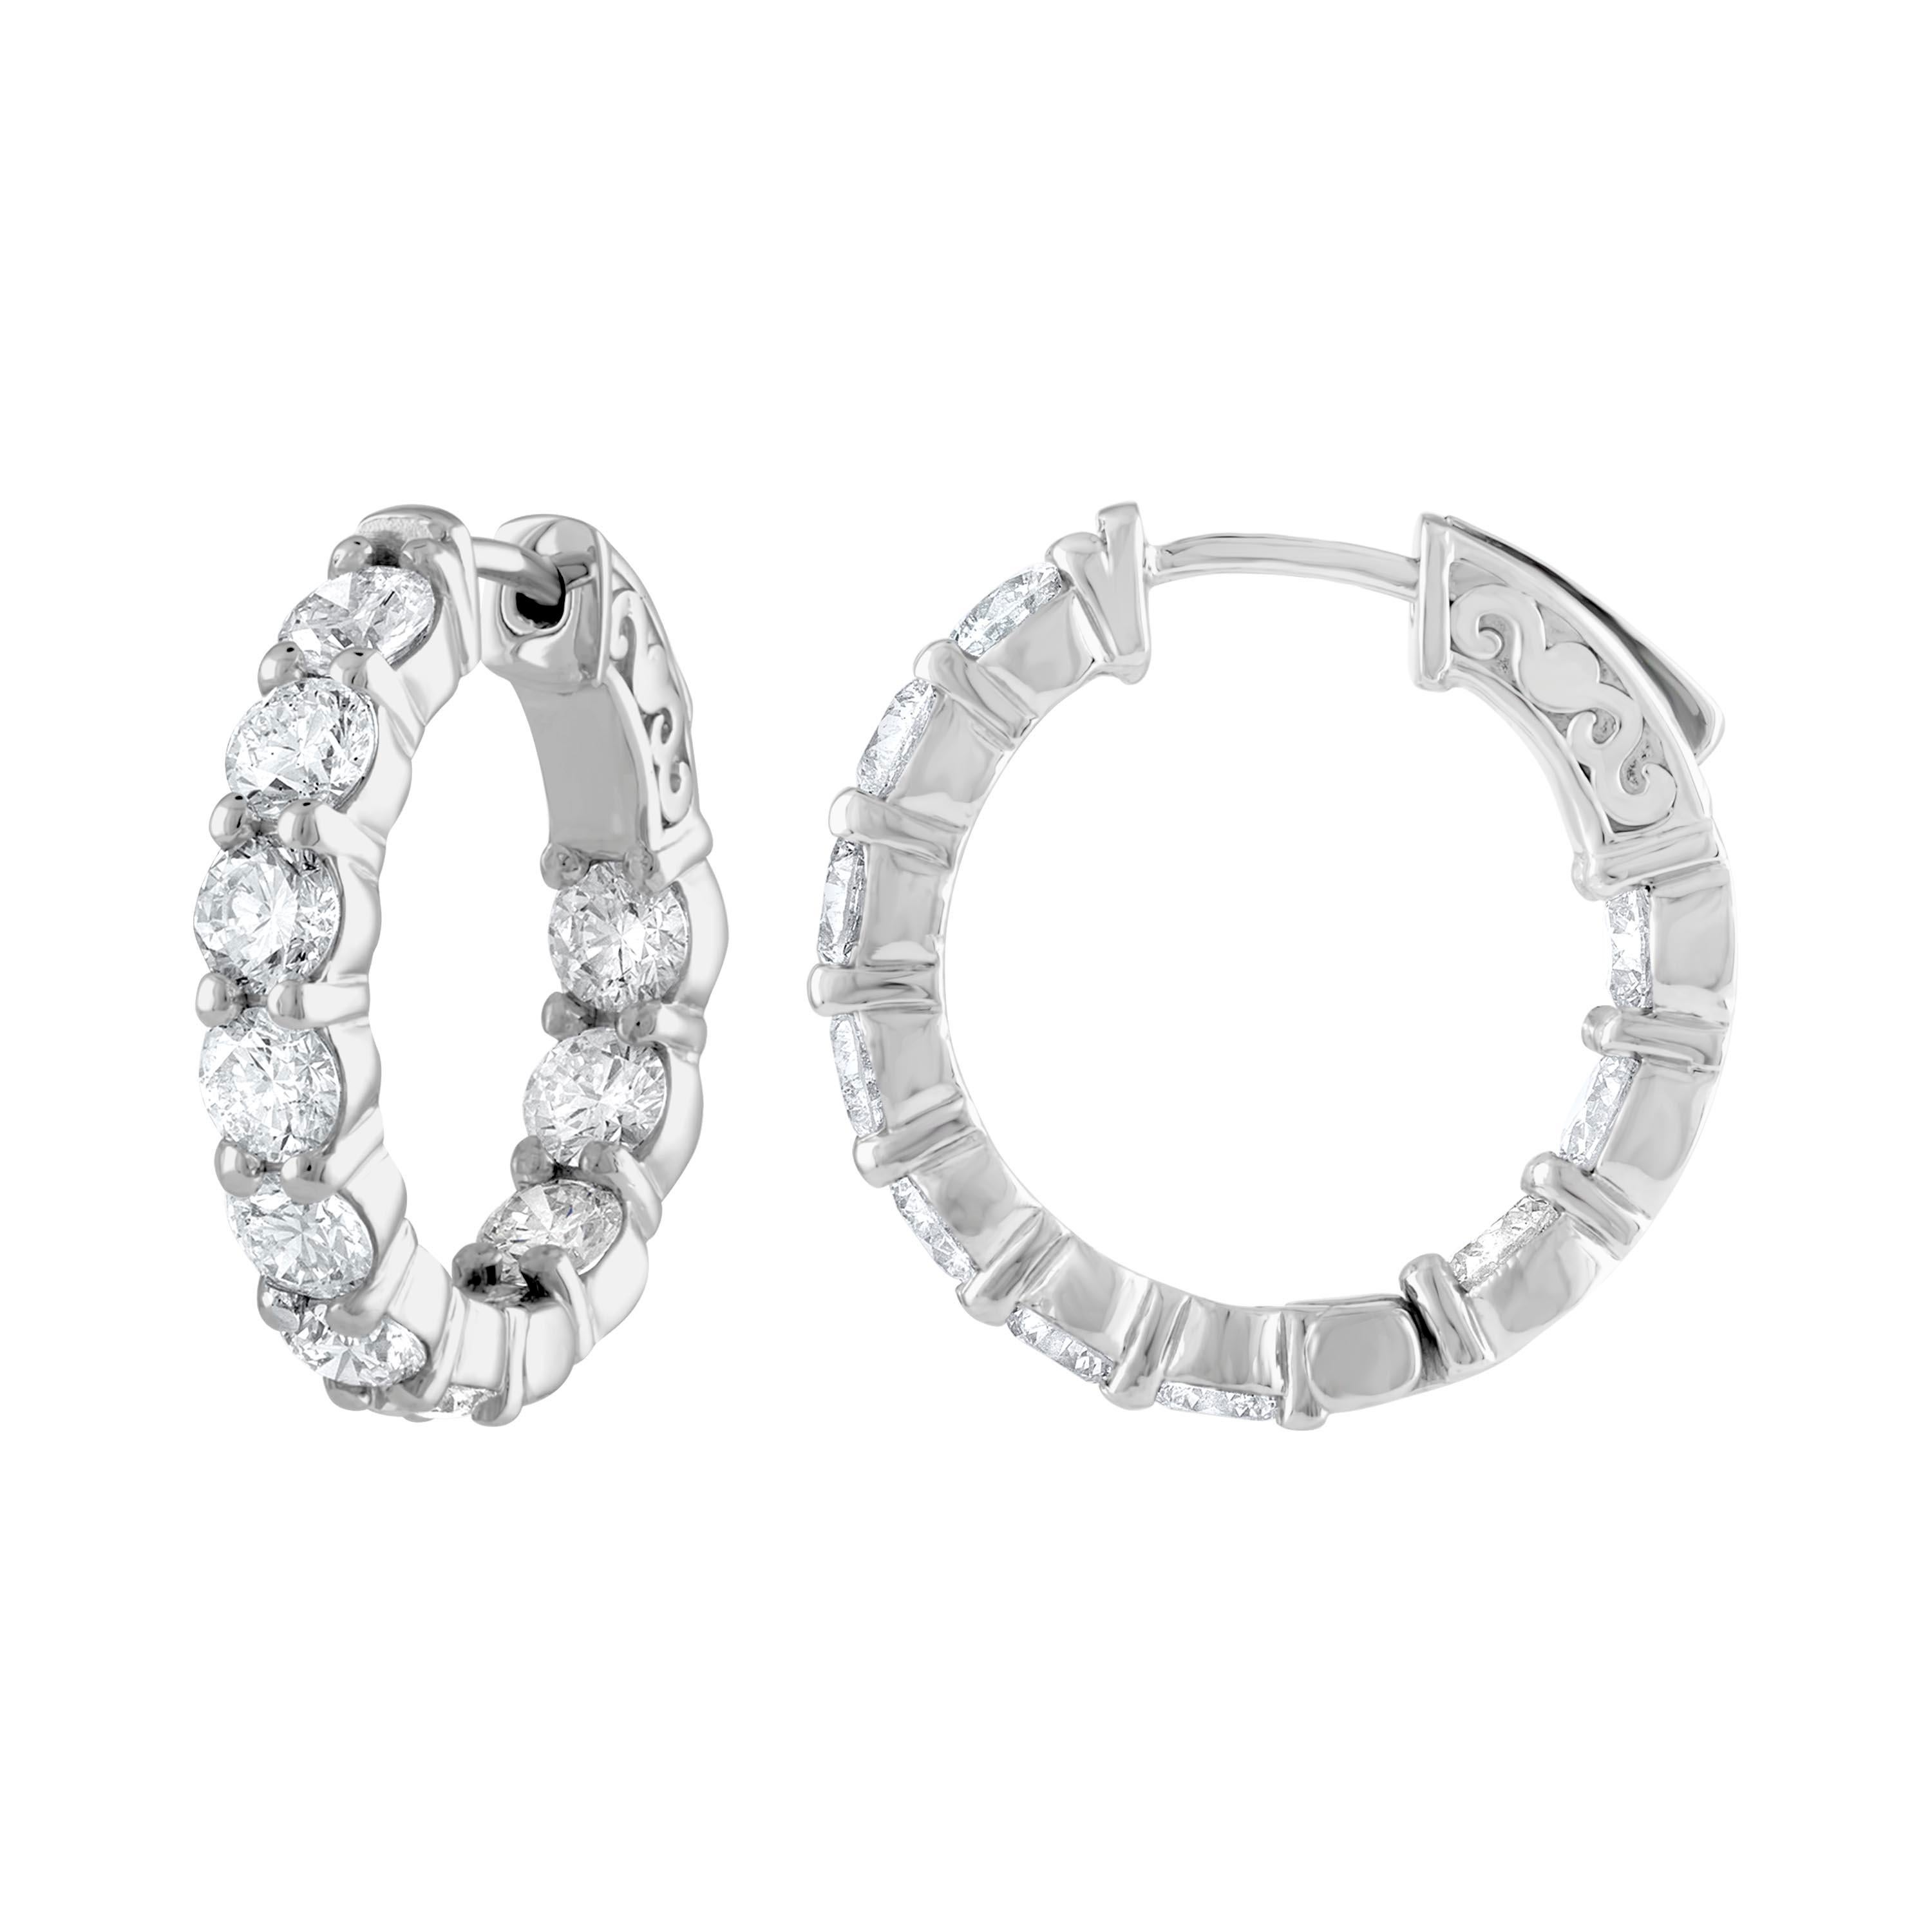 14K White Gold Diamond Earrings featuring 4.03 Carat T.W. of Natural Diamonds

Underline your look with this sharp 14K White Gold Diamond Earrings. High quality Diamonds. This Earrings will underline your exquisite look for any occasion.

. is a